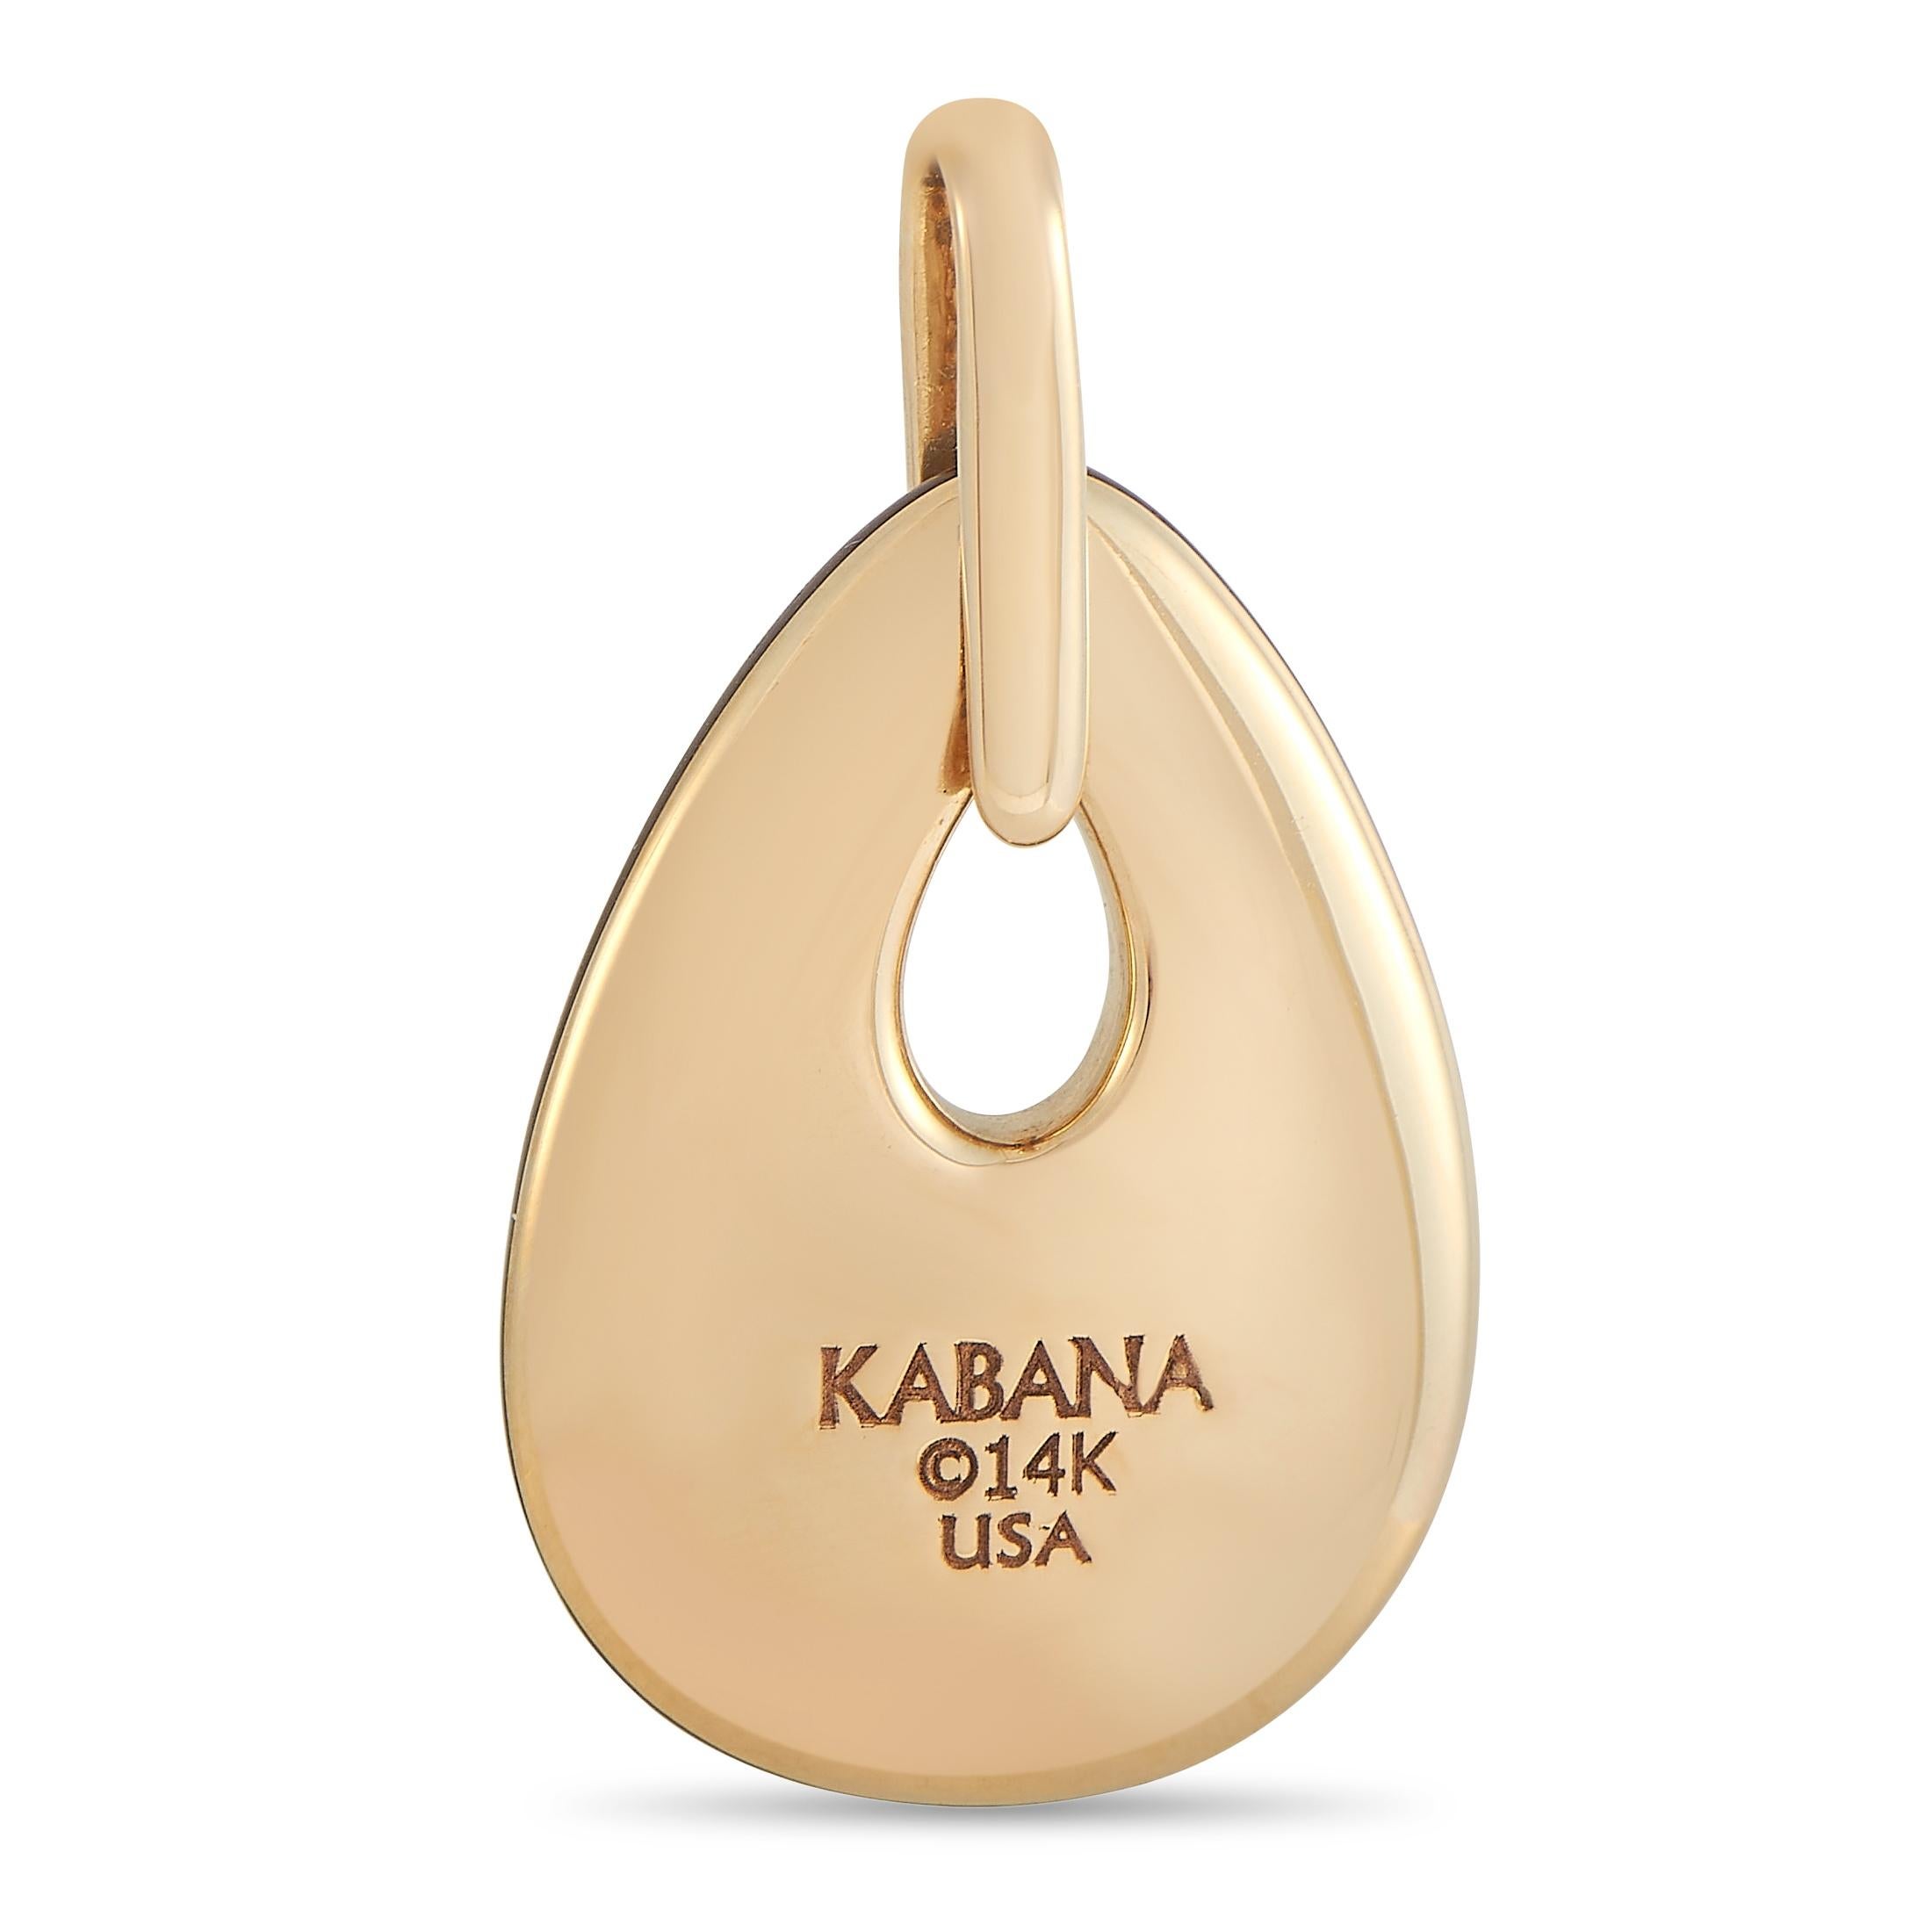 This unique Kabana 14K Yellow Gold 0.21 ct Diamond and Mother of Pearl Pendant is made with 14K yellow gold. The face of the pendant is almost completely covered with an inlay of a multicolored mother of pearl. Six round-cut diamonds are bezel set